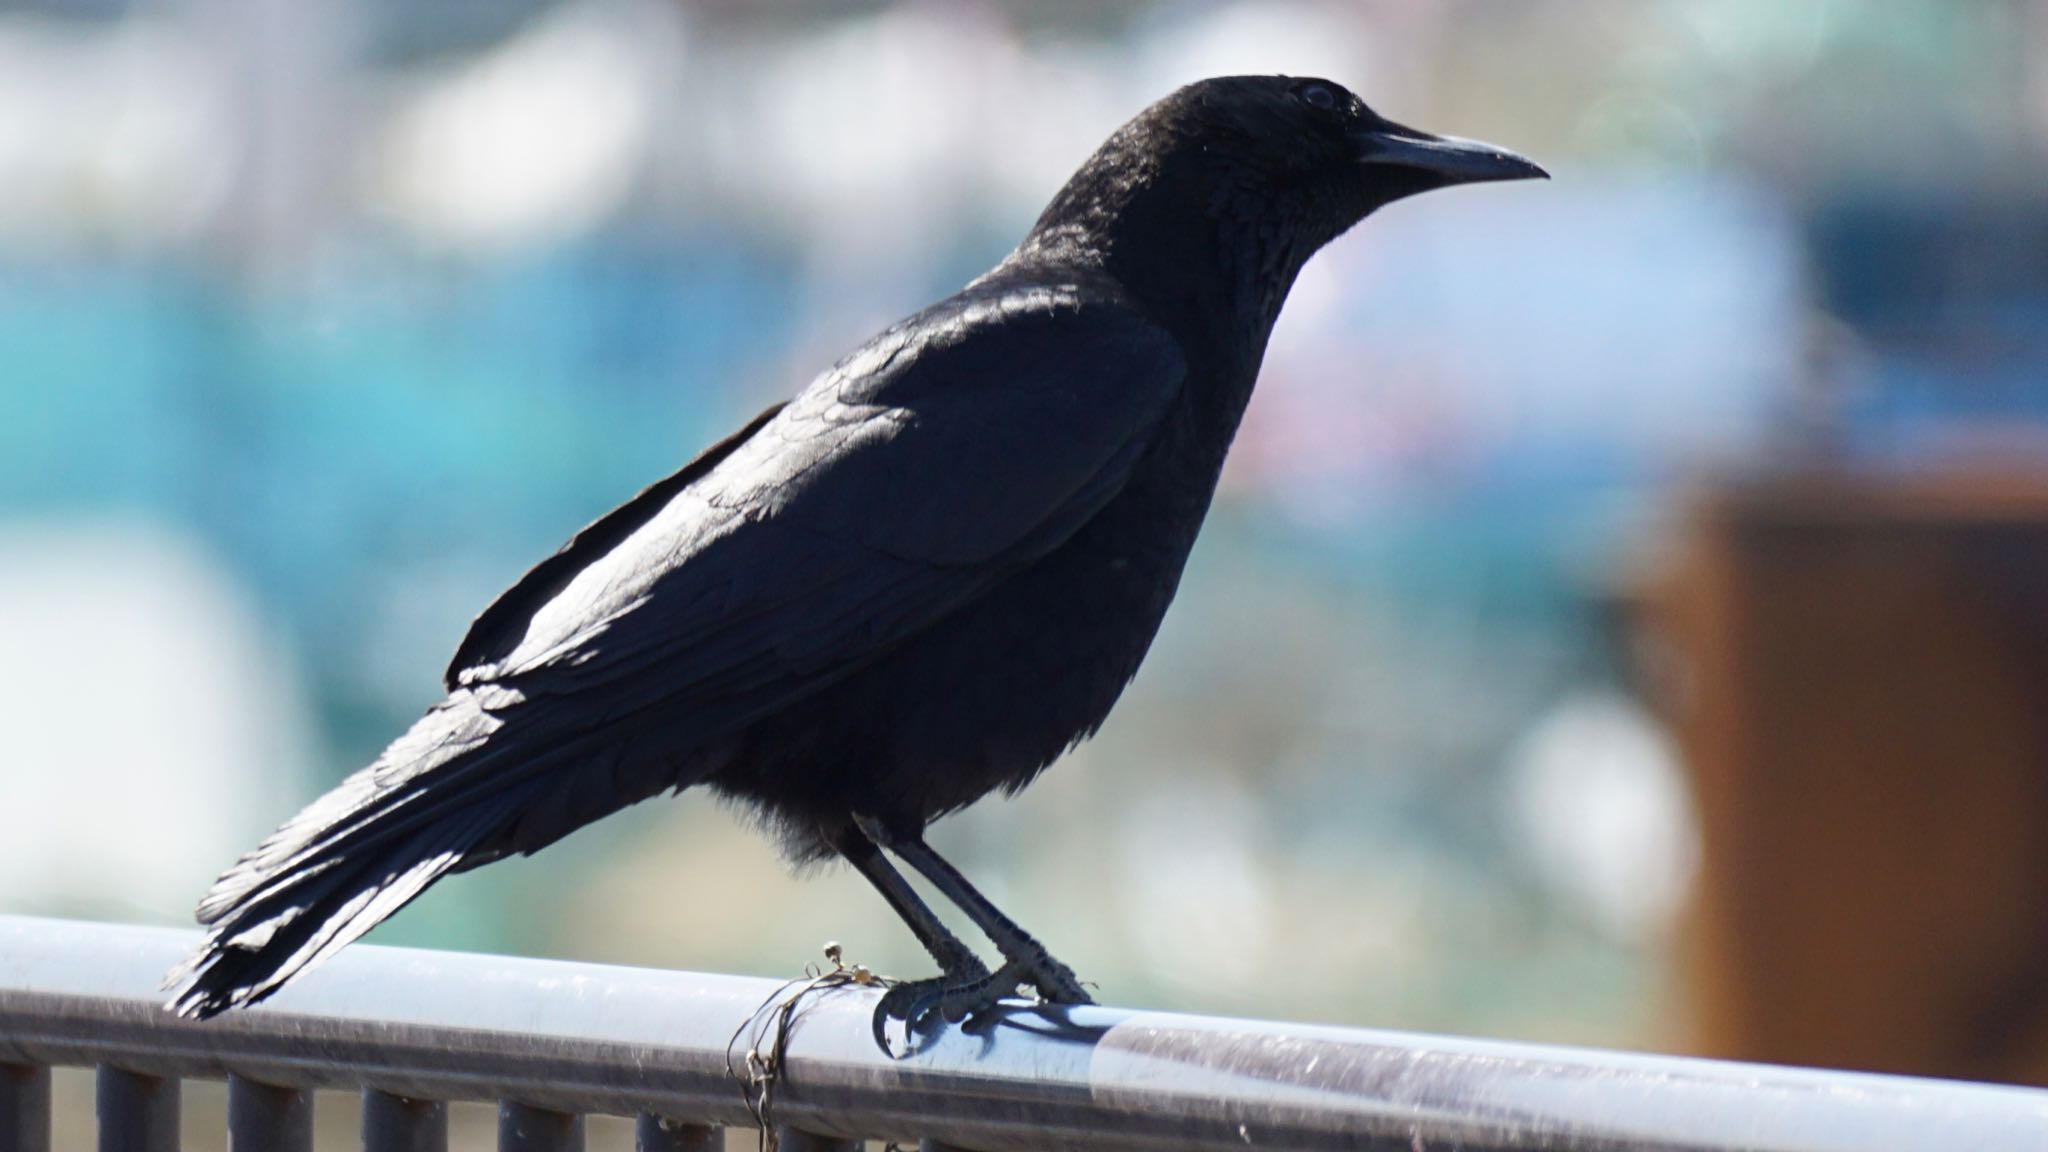 Photo of Carrion Crow at 埼玉県さいたま市 by ツピ太郎